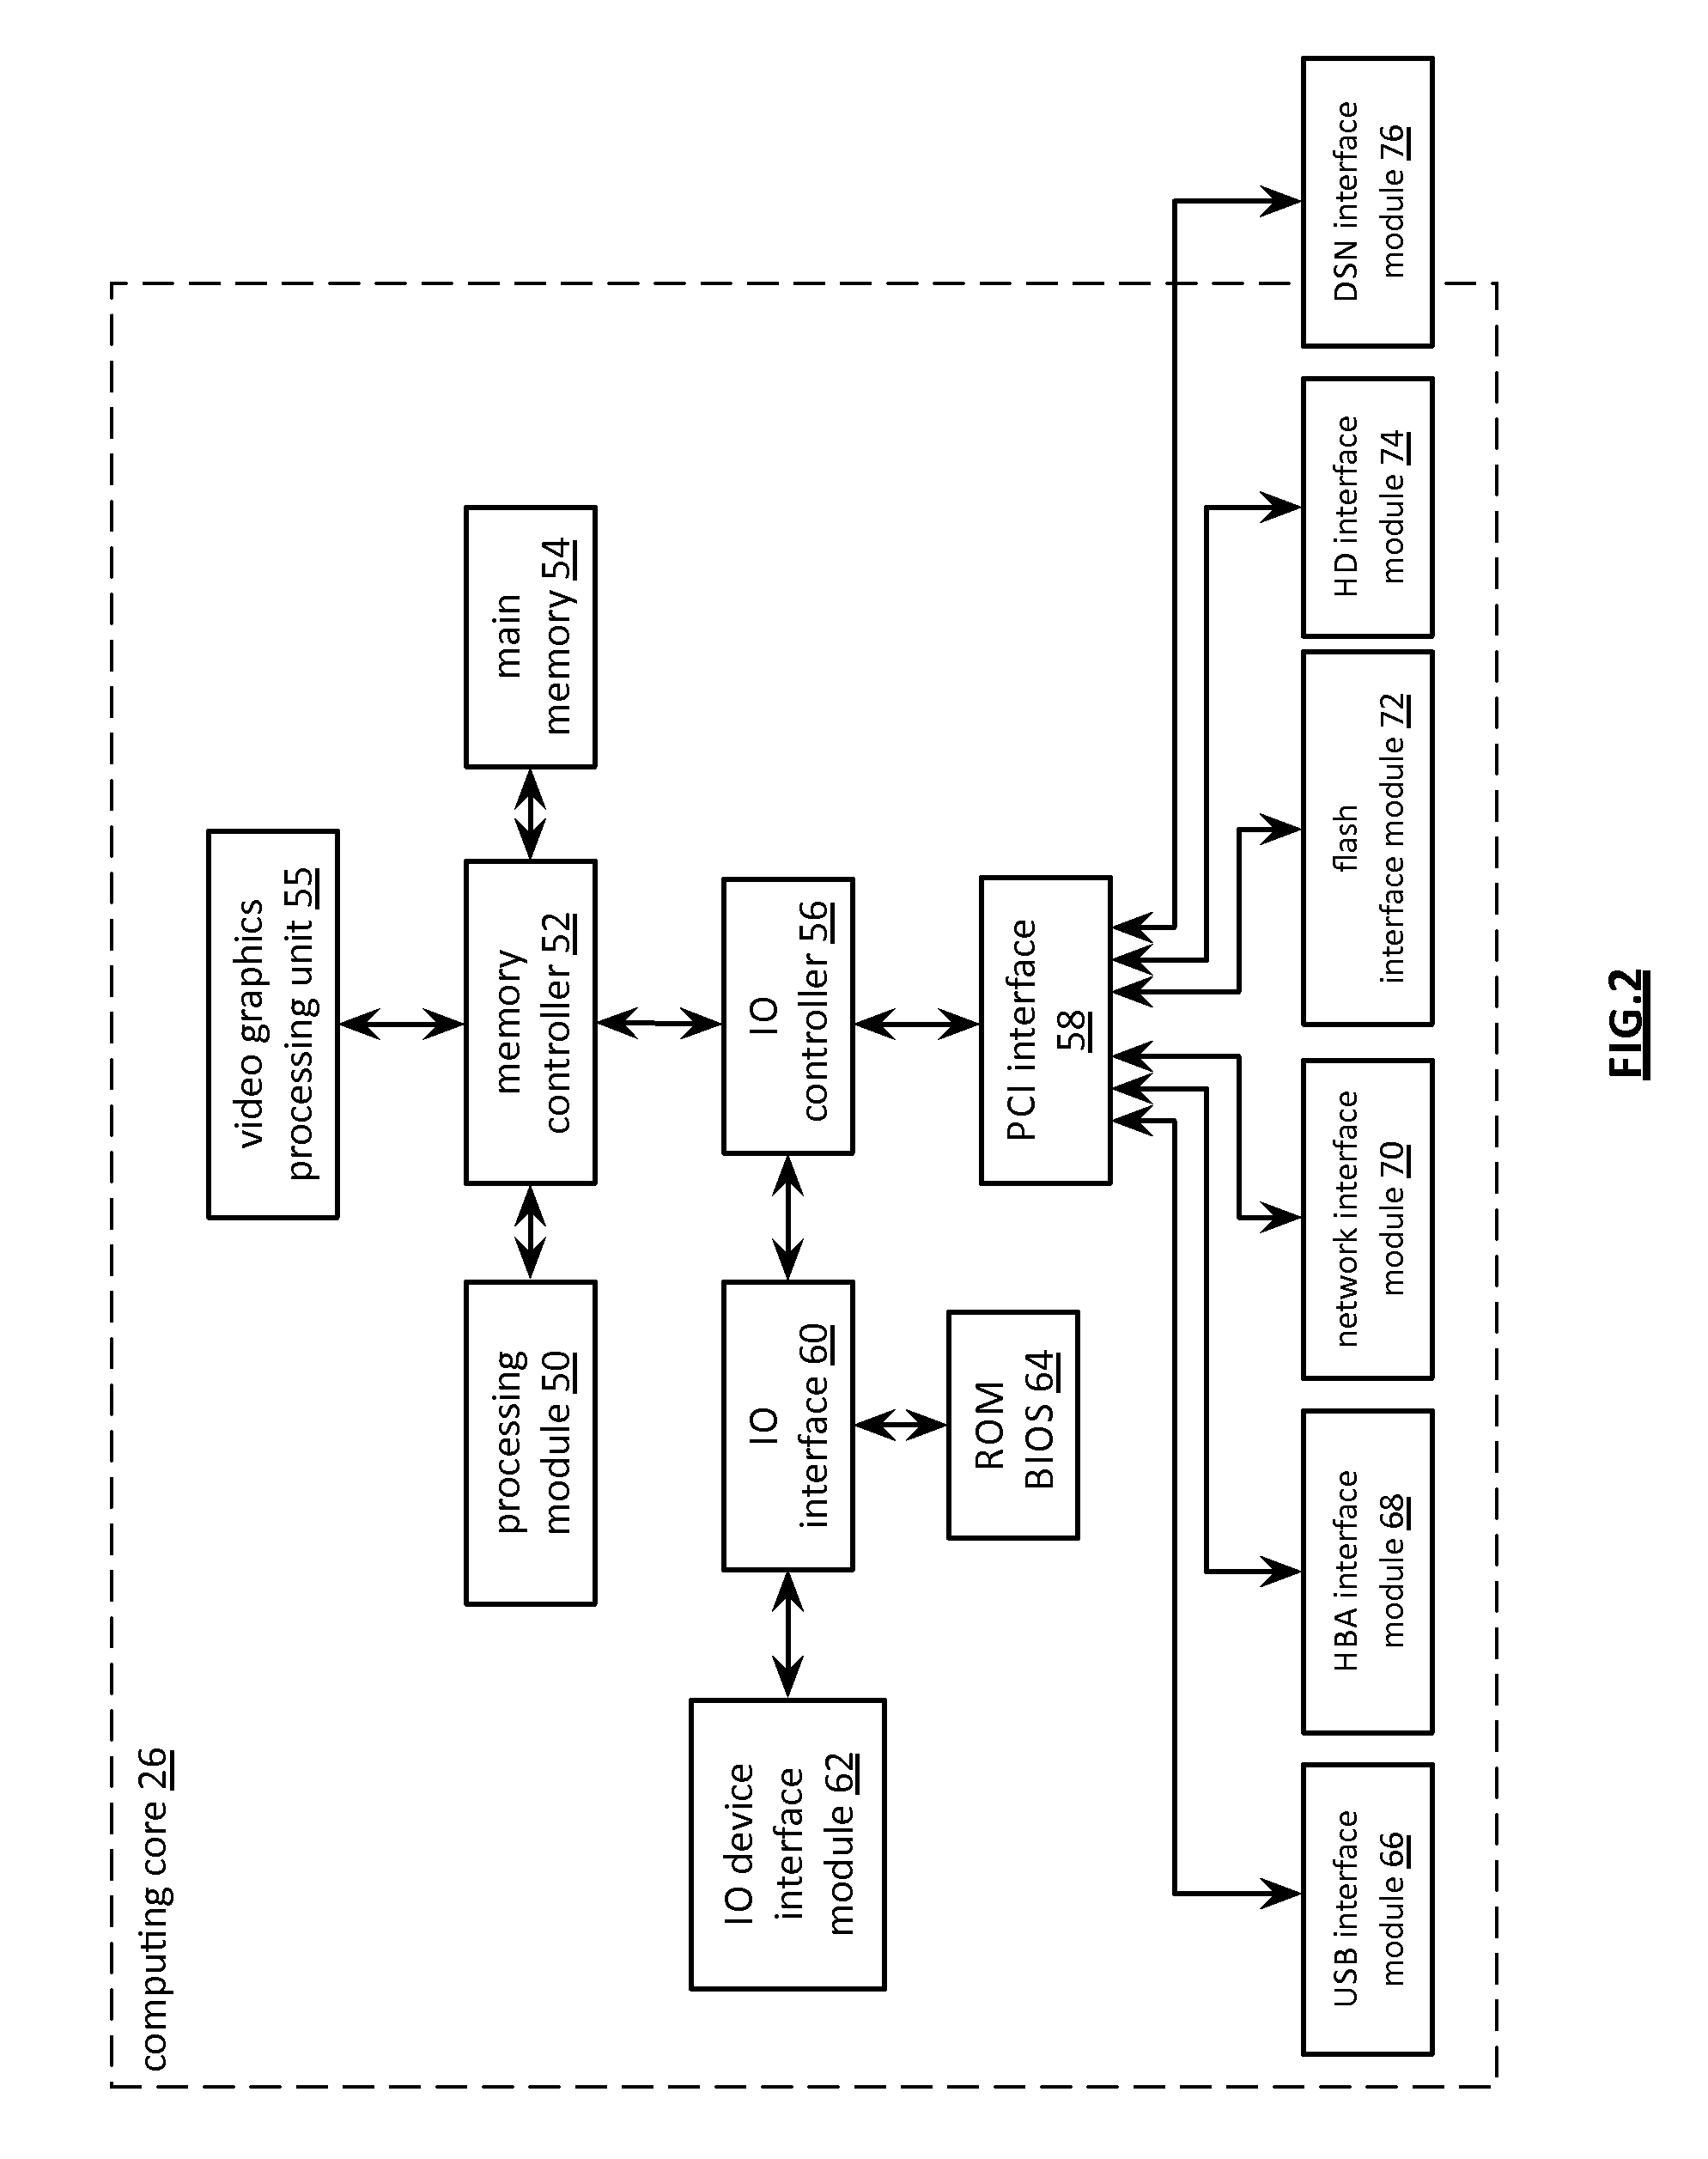 Prioritized deleting of slices stored in a dispersed storage network